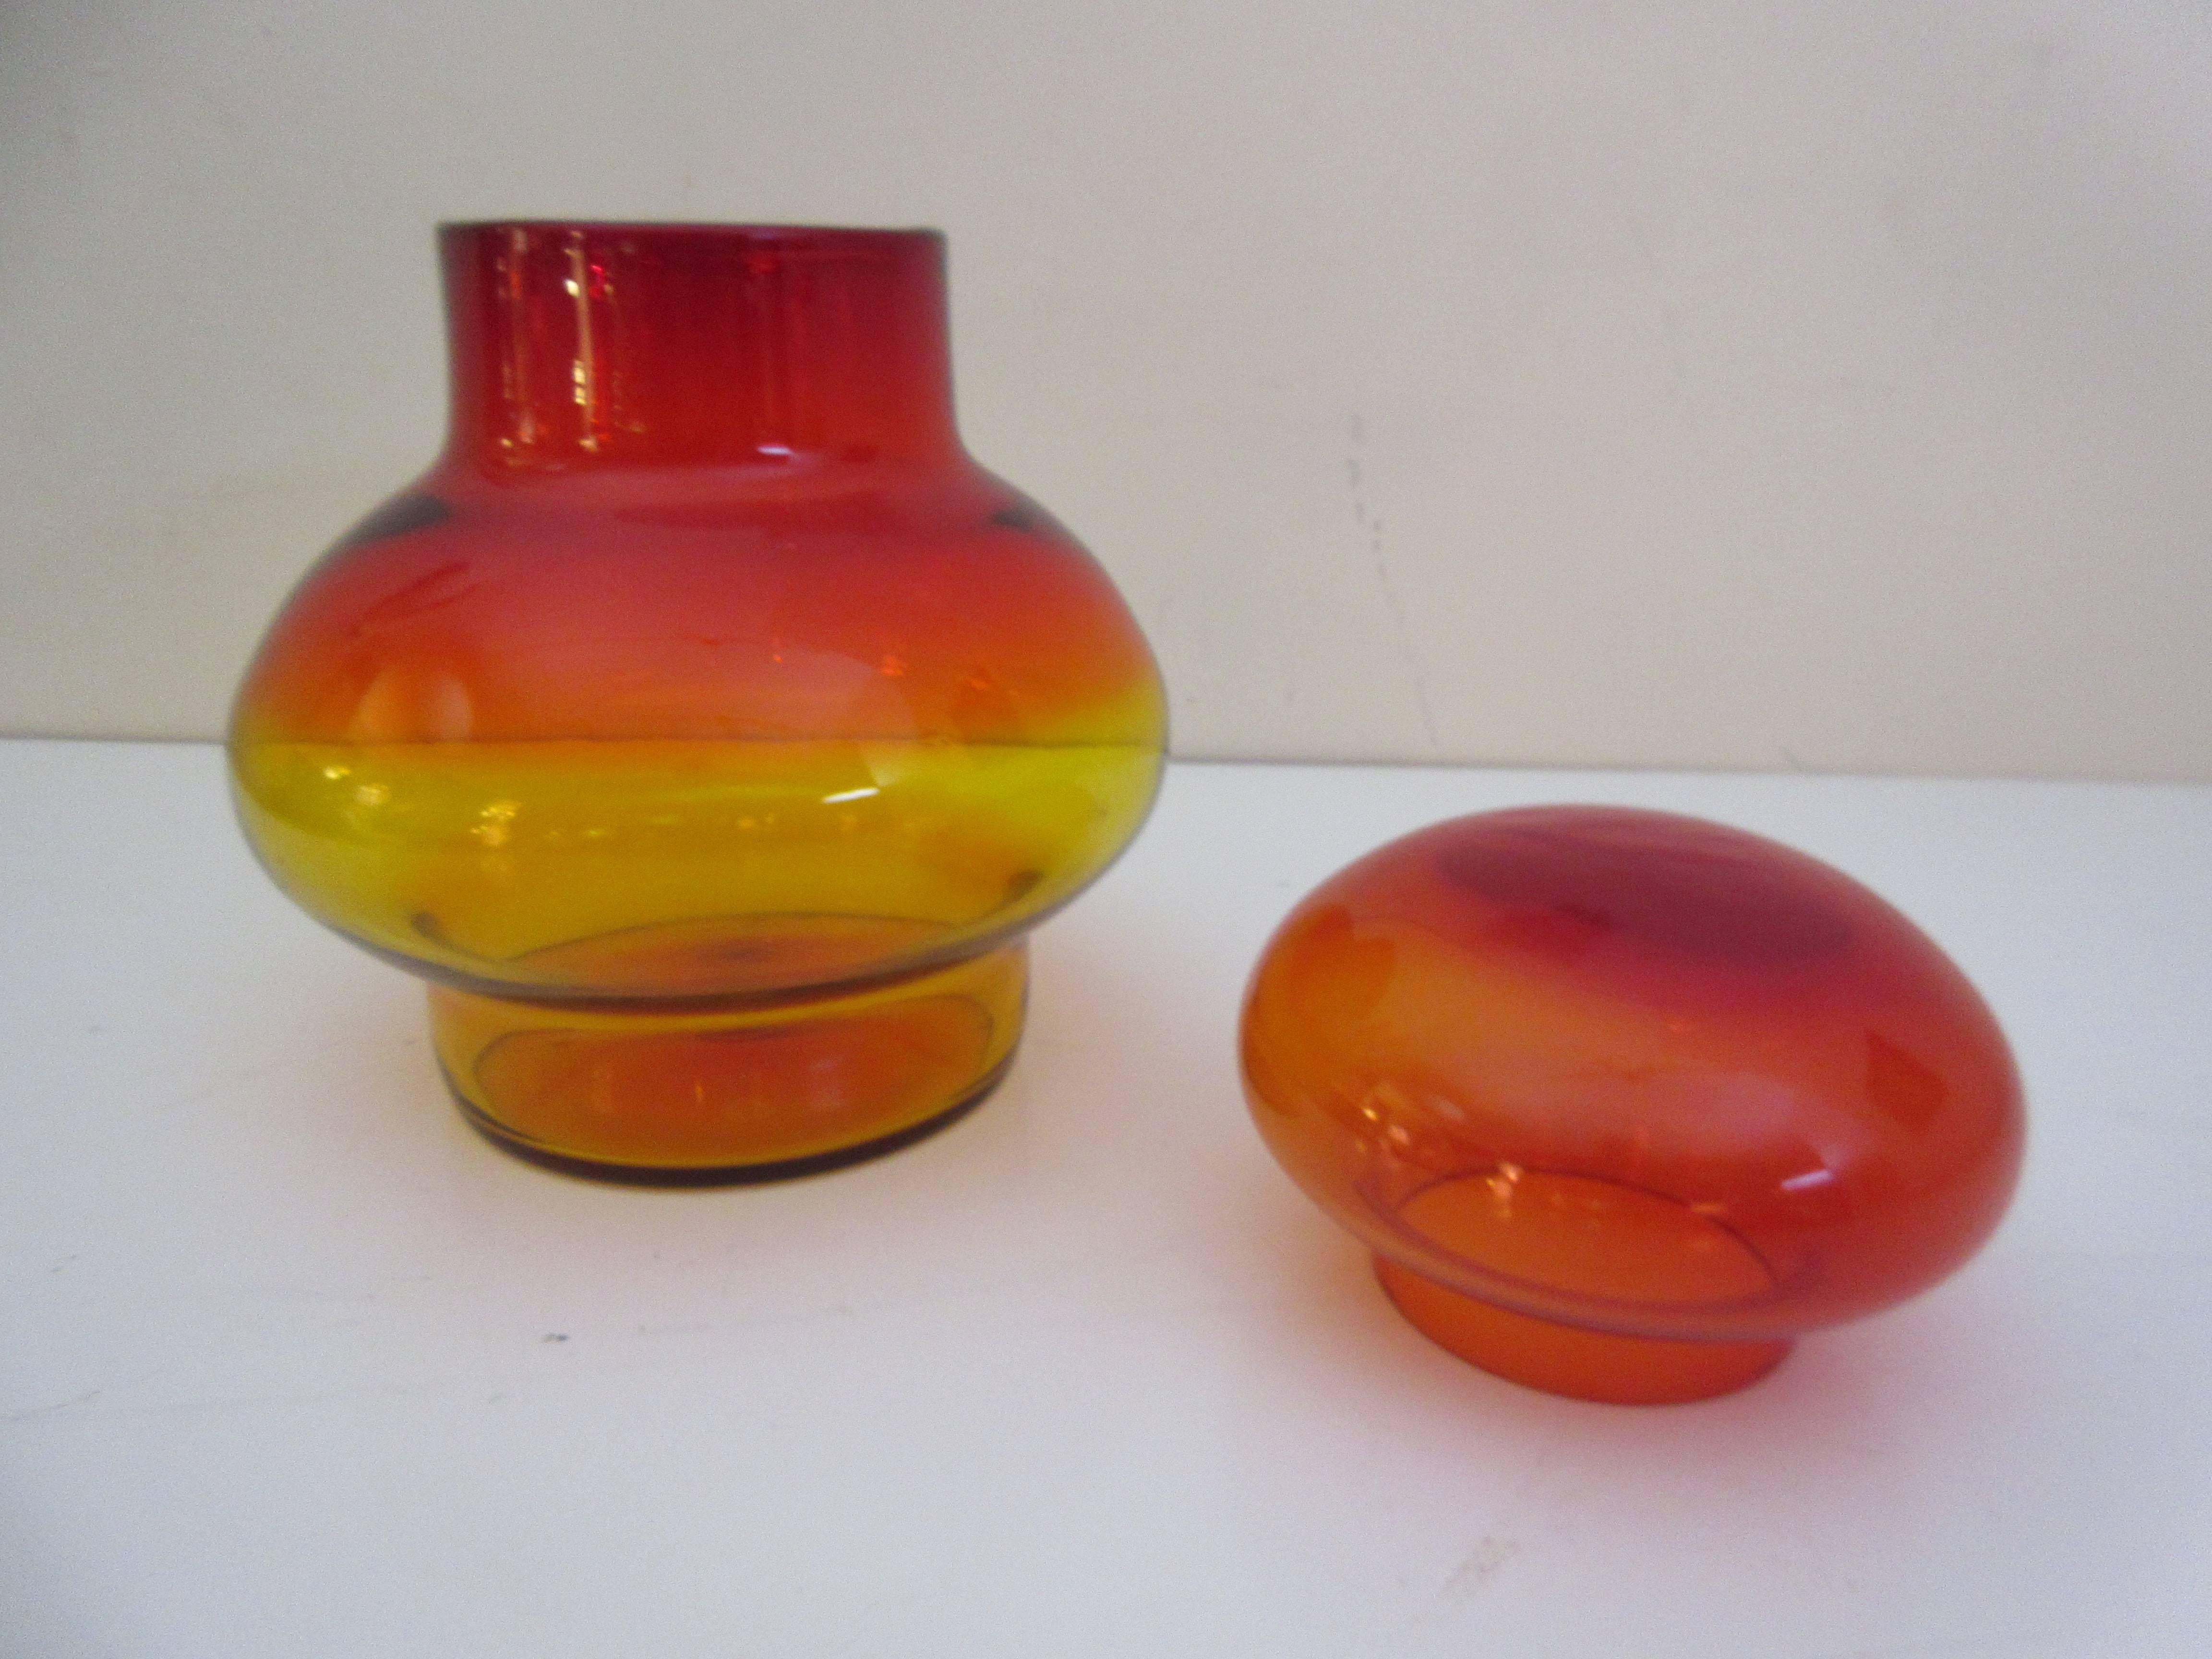 Blenko Amberina covered Jar perfect in every way. The Amberina series coloring goes from a yellow to orange to a bright red by degree.